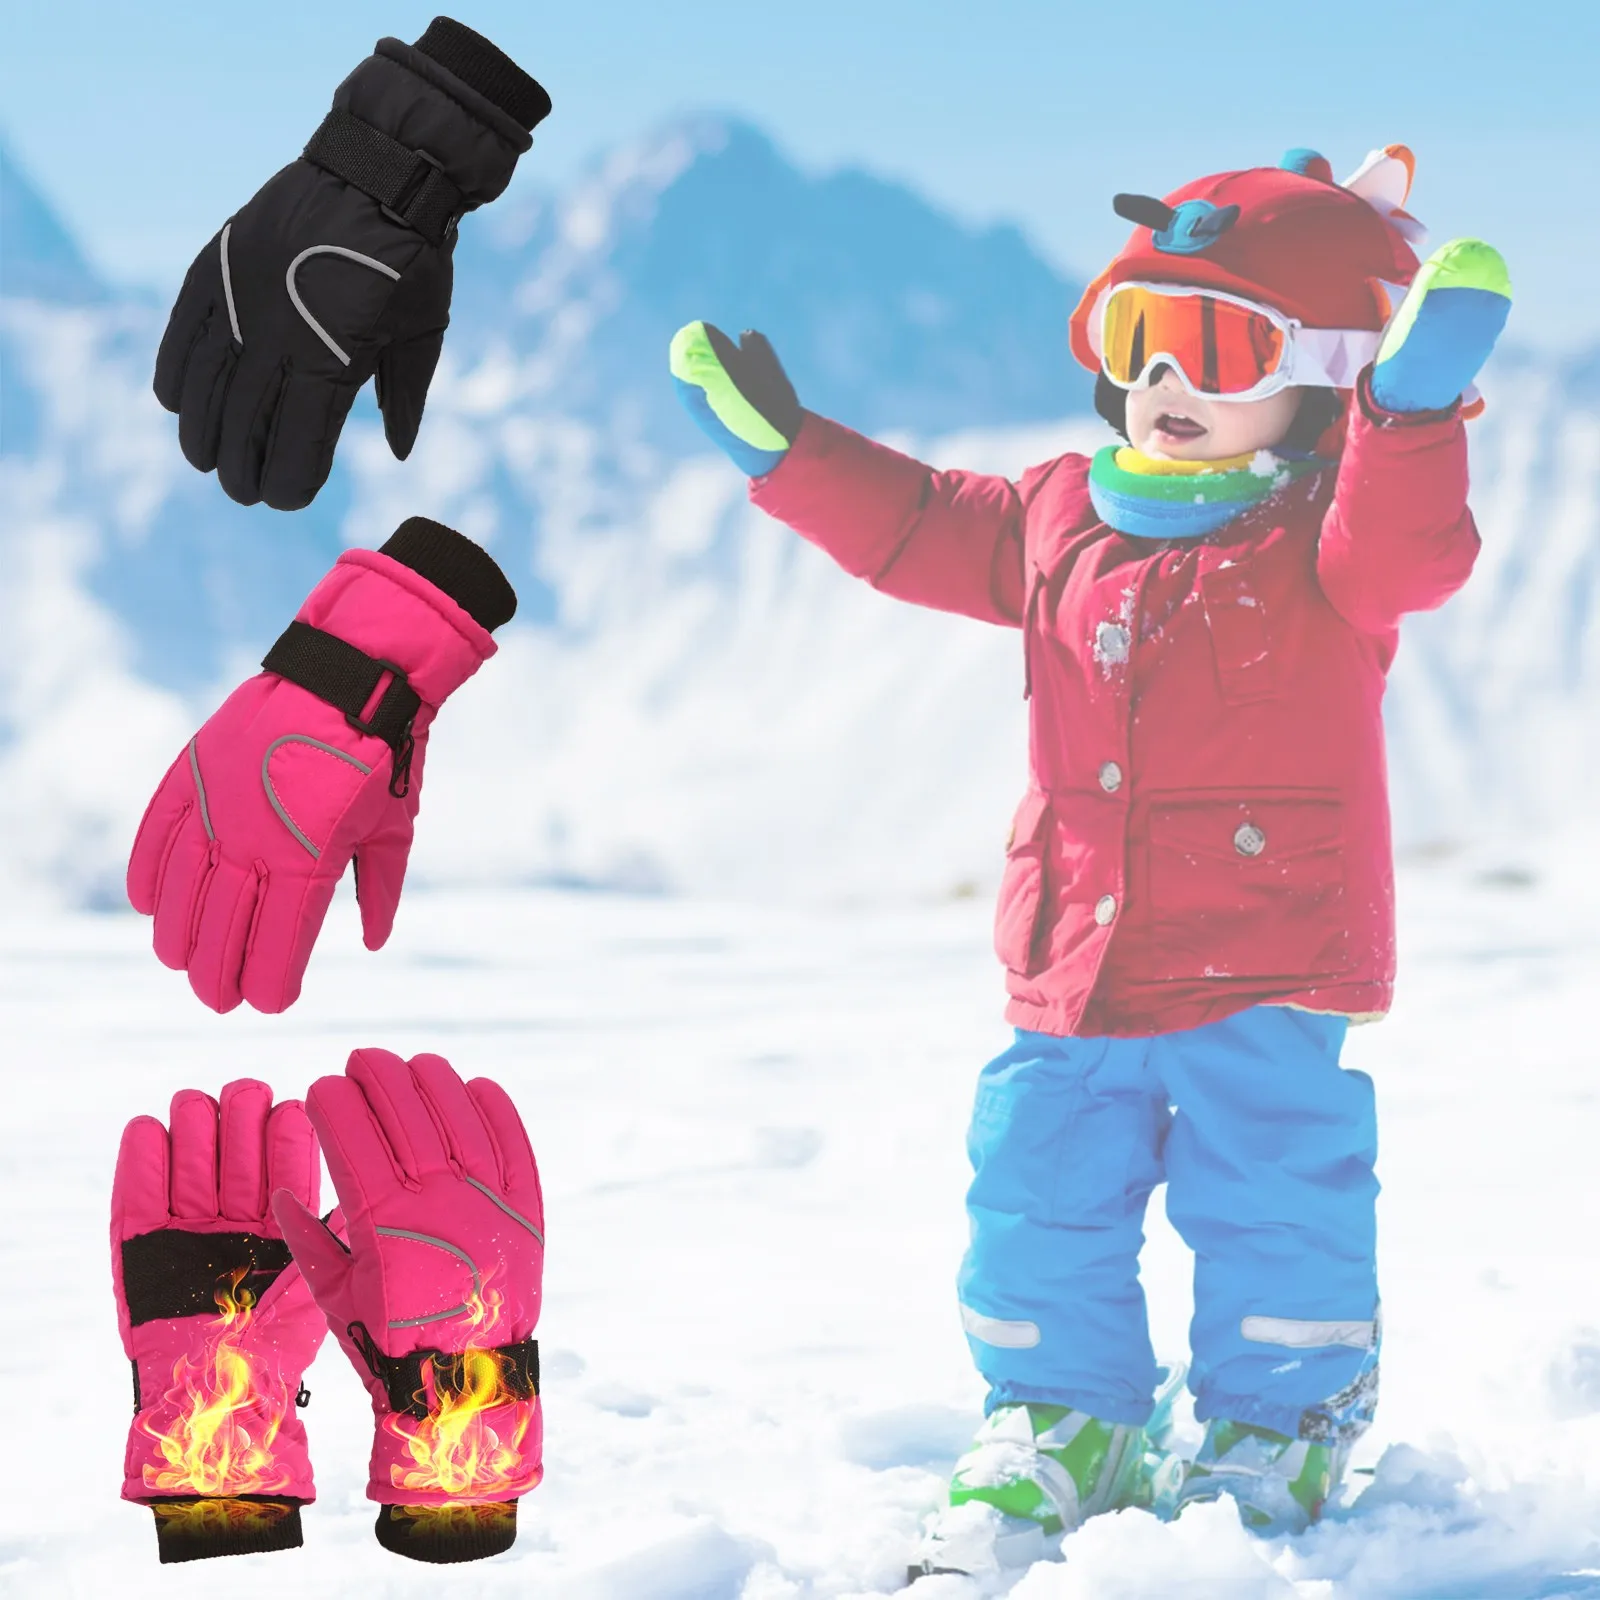 Azarxis Kids Ski Snow Gloves Winter Warm Mittens Windproof Lined Thermal Water Resistant Sledding Cycling Skiing Riding Skating Biking Outdoor for Children Aged 6-12 